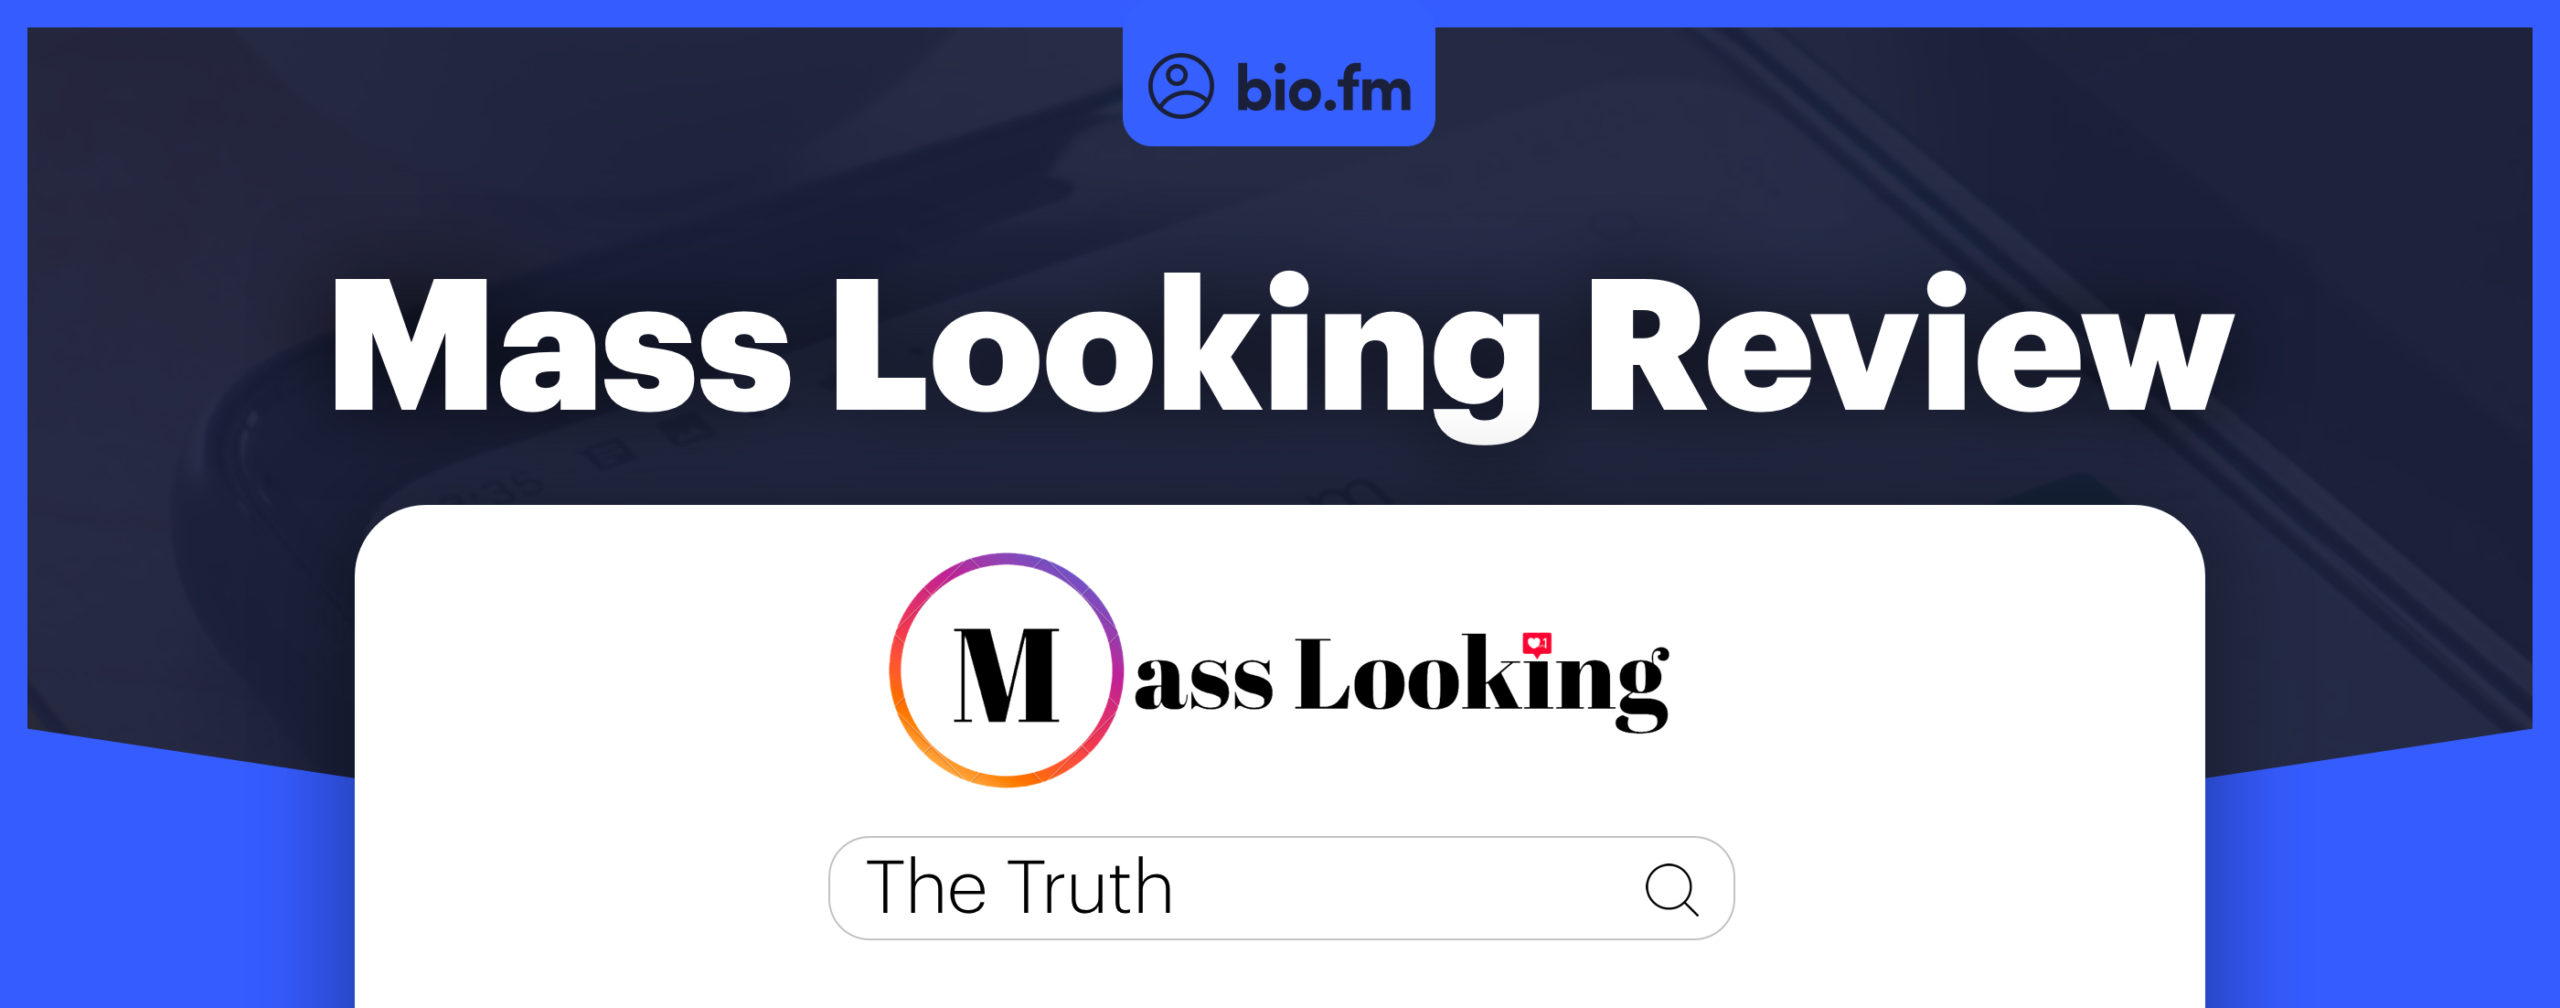 masslooking review featured image